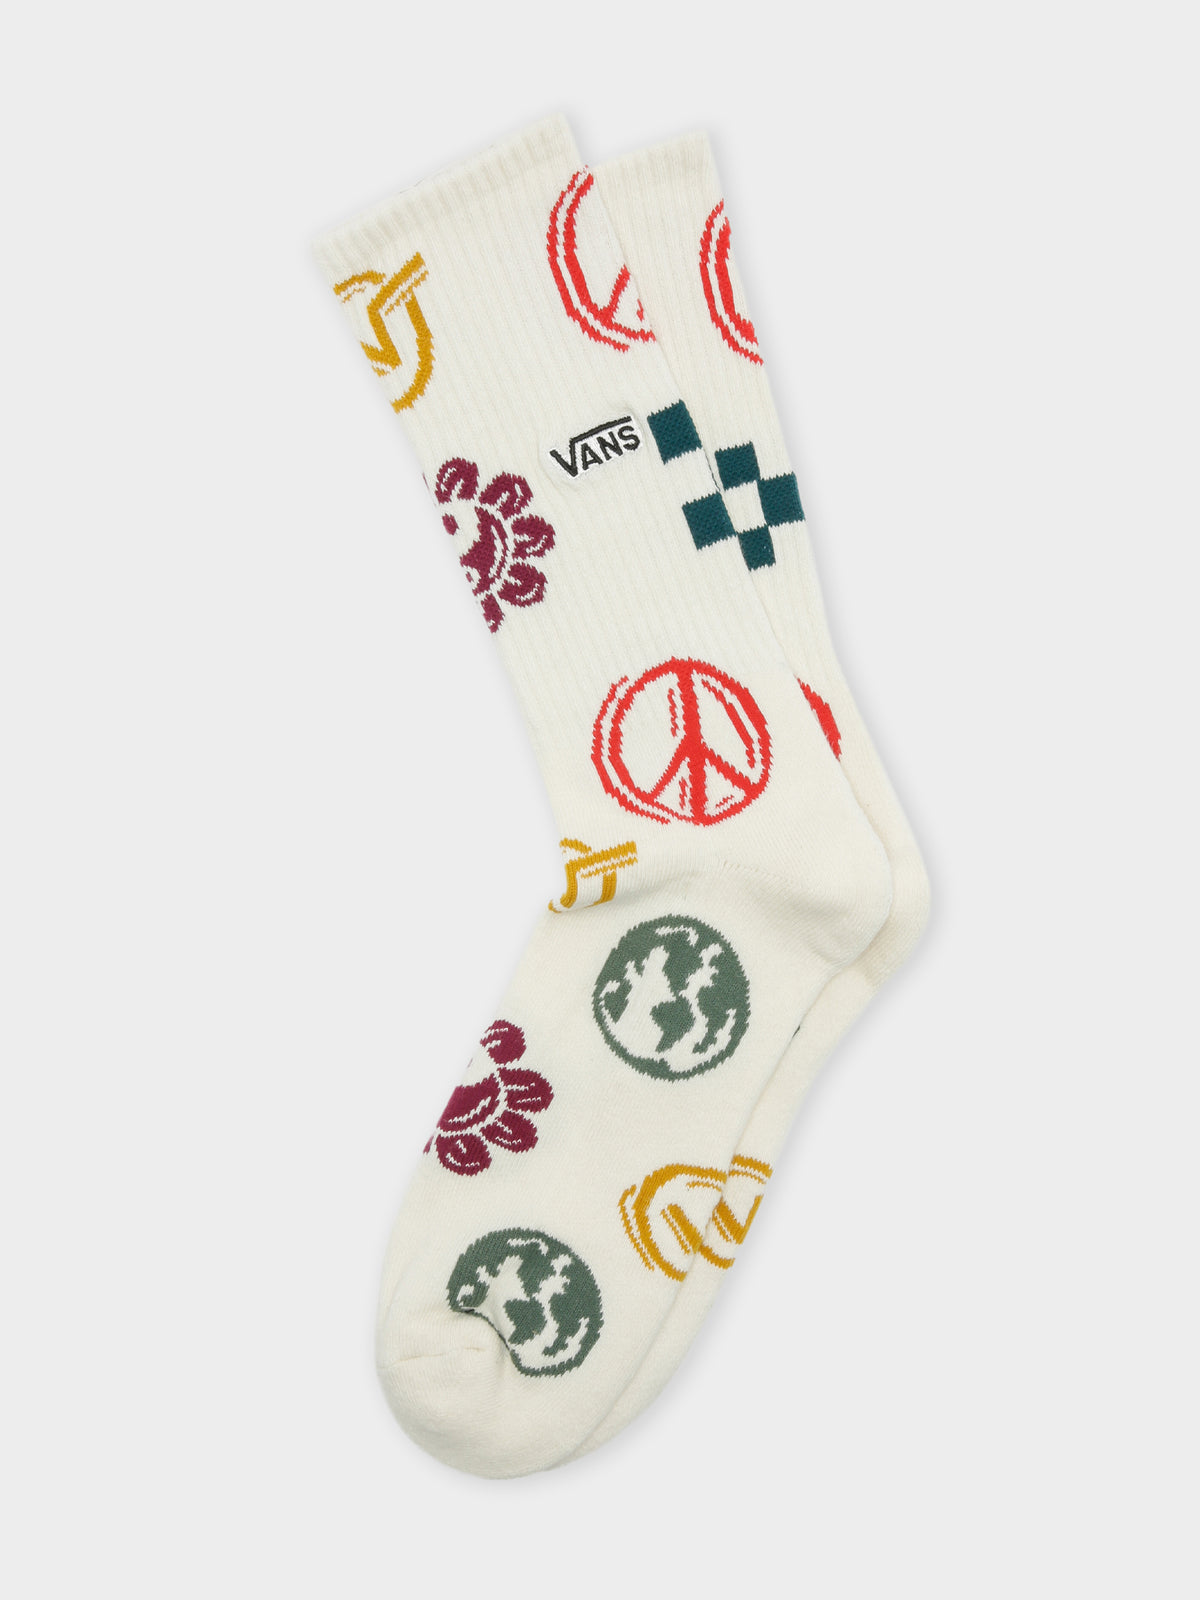 One Pair of In Our Hands Crew Socks in Off White